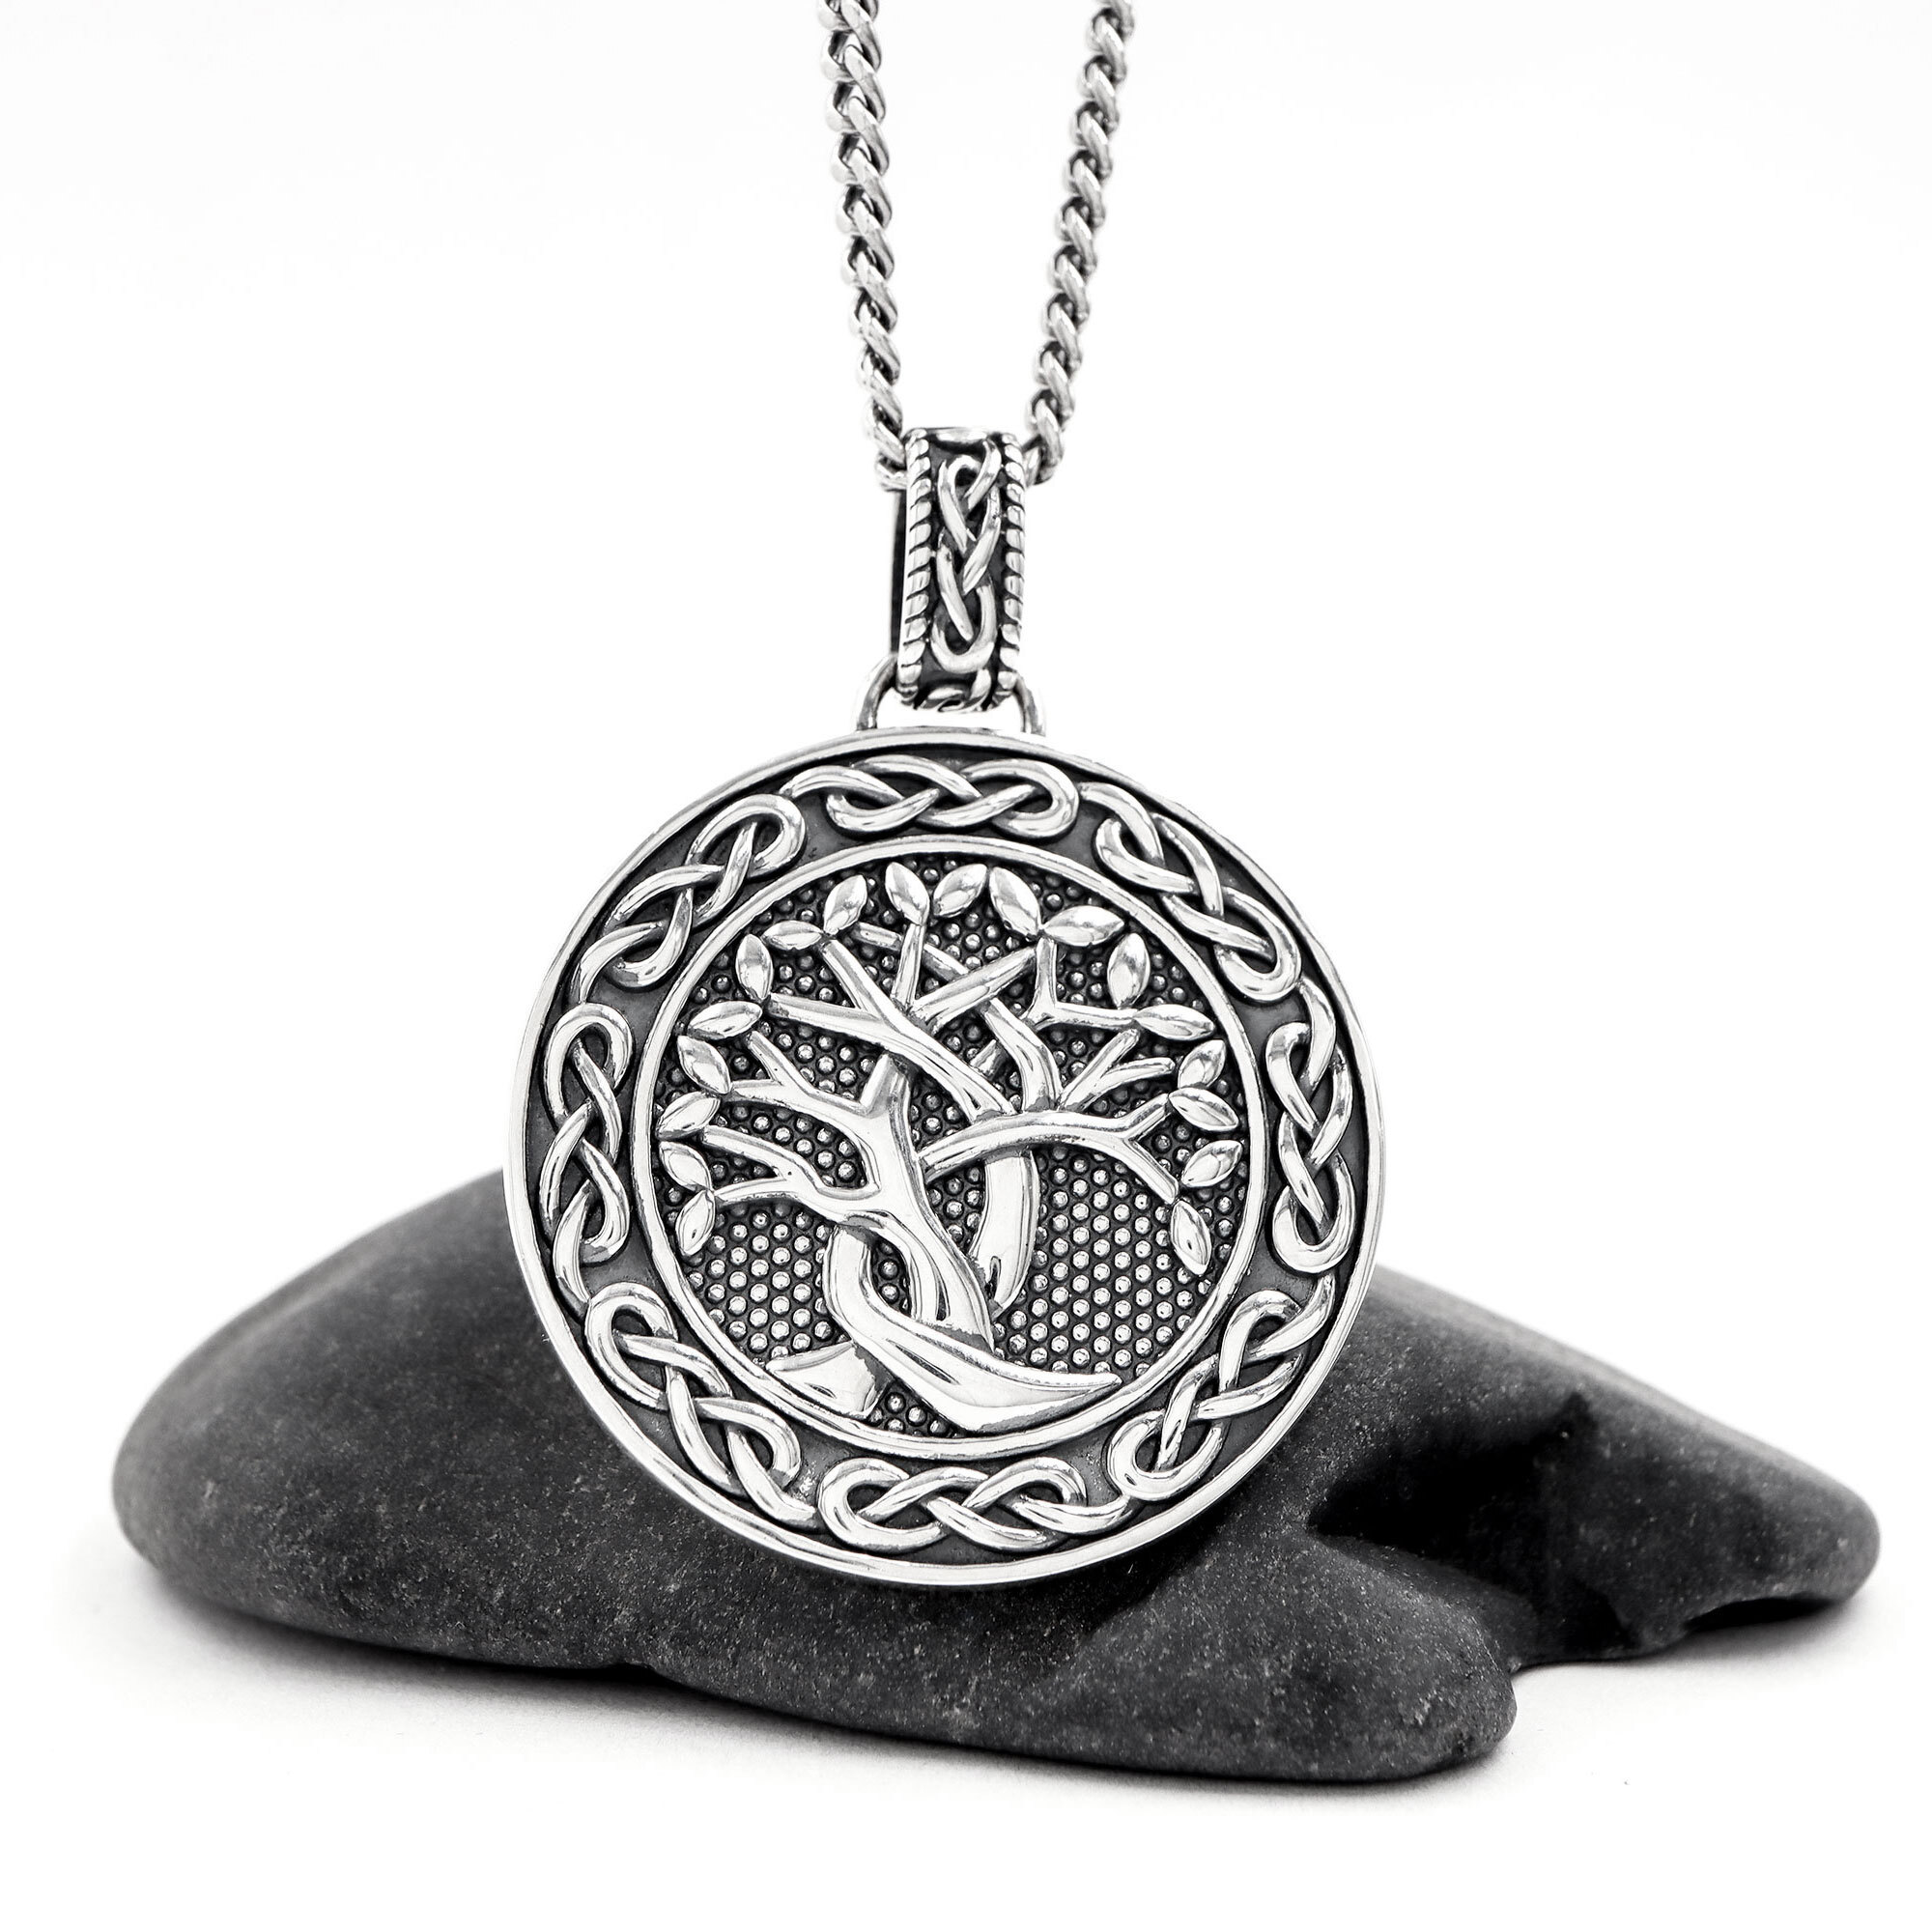 Buy Clara 925 Sterling Silver Tree of Life Pendant Chain Necklace | Rhodium  Plated, Swiss Zirconia | Gift for Women and Girls at Amazon.in